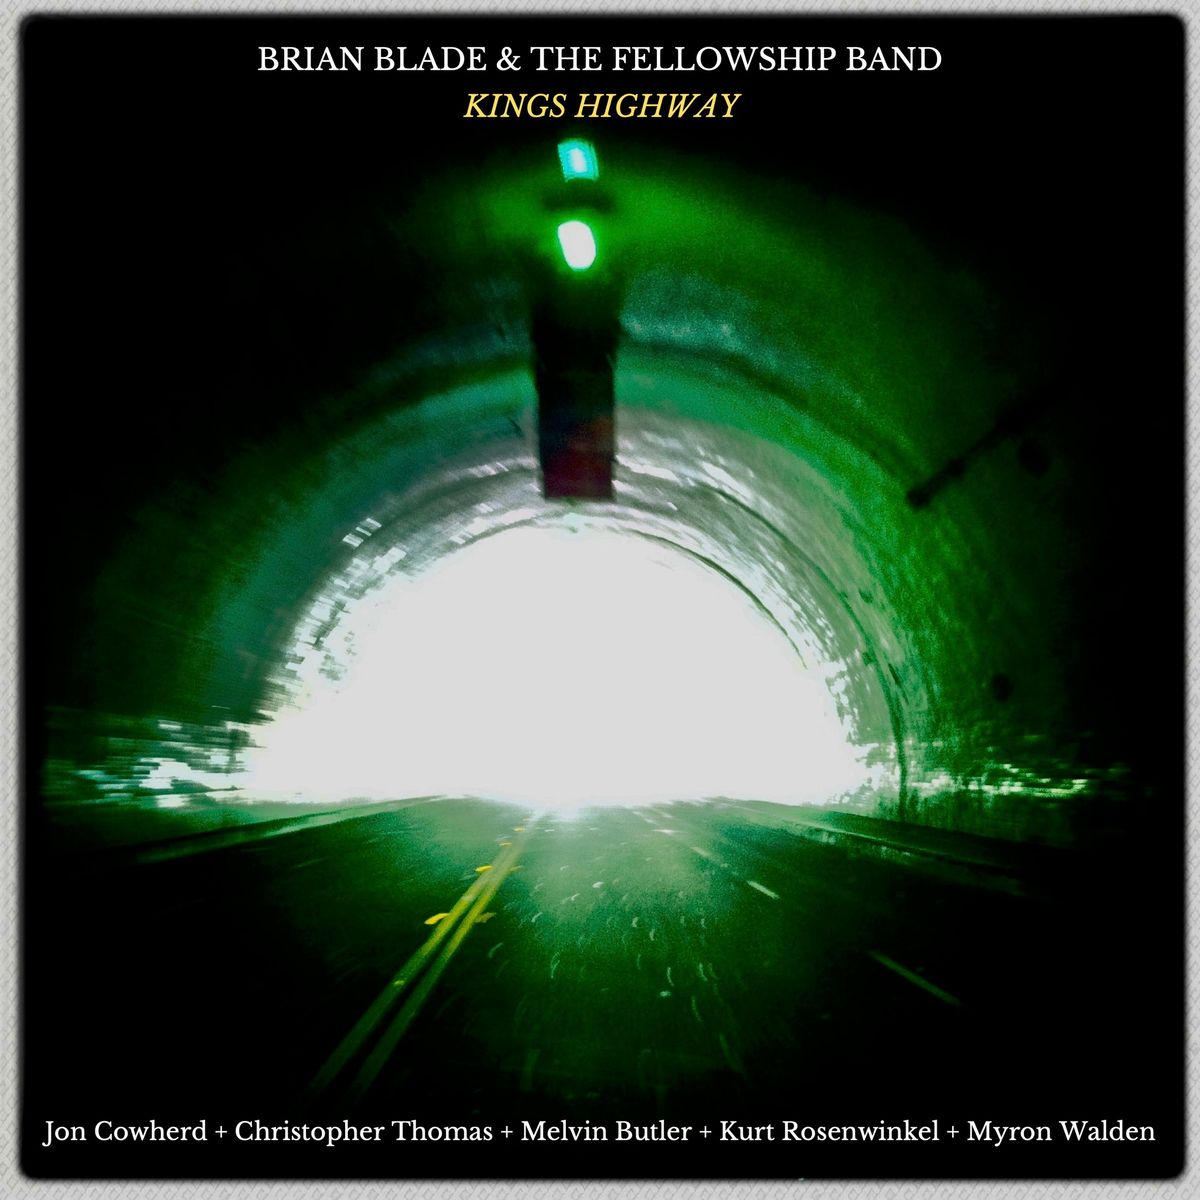 Brian Blade & The Fellowship Band at the Wiener Konzerthaus